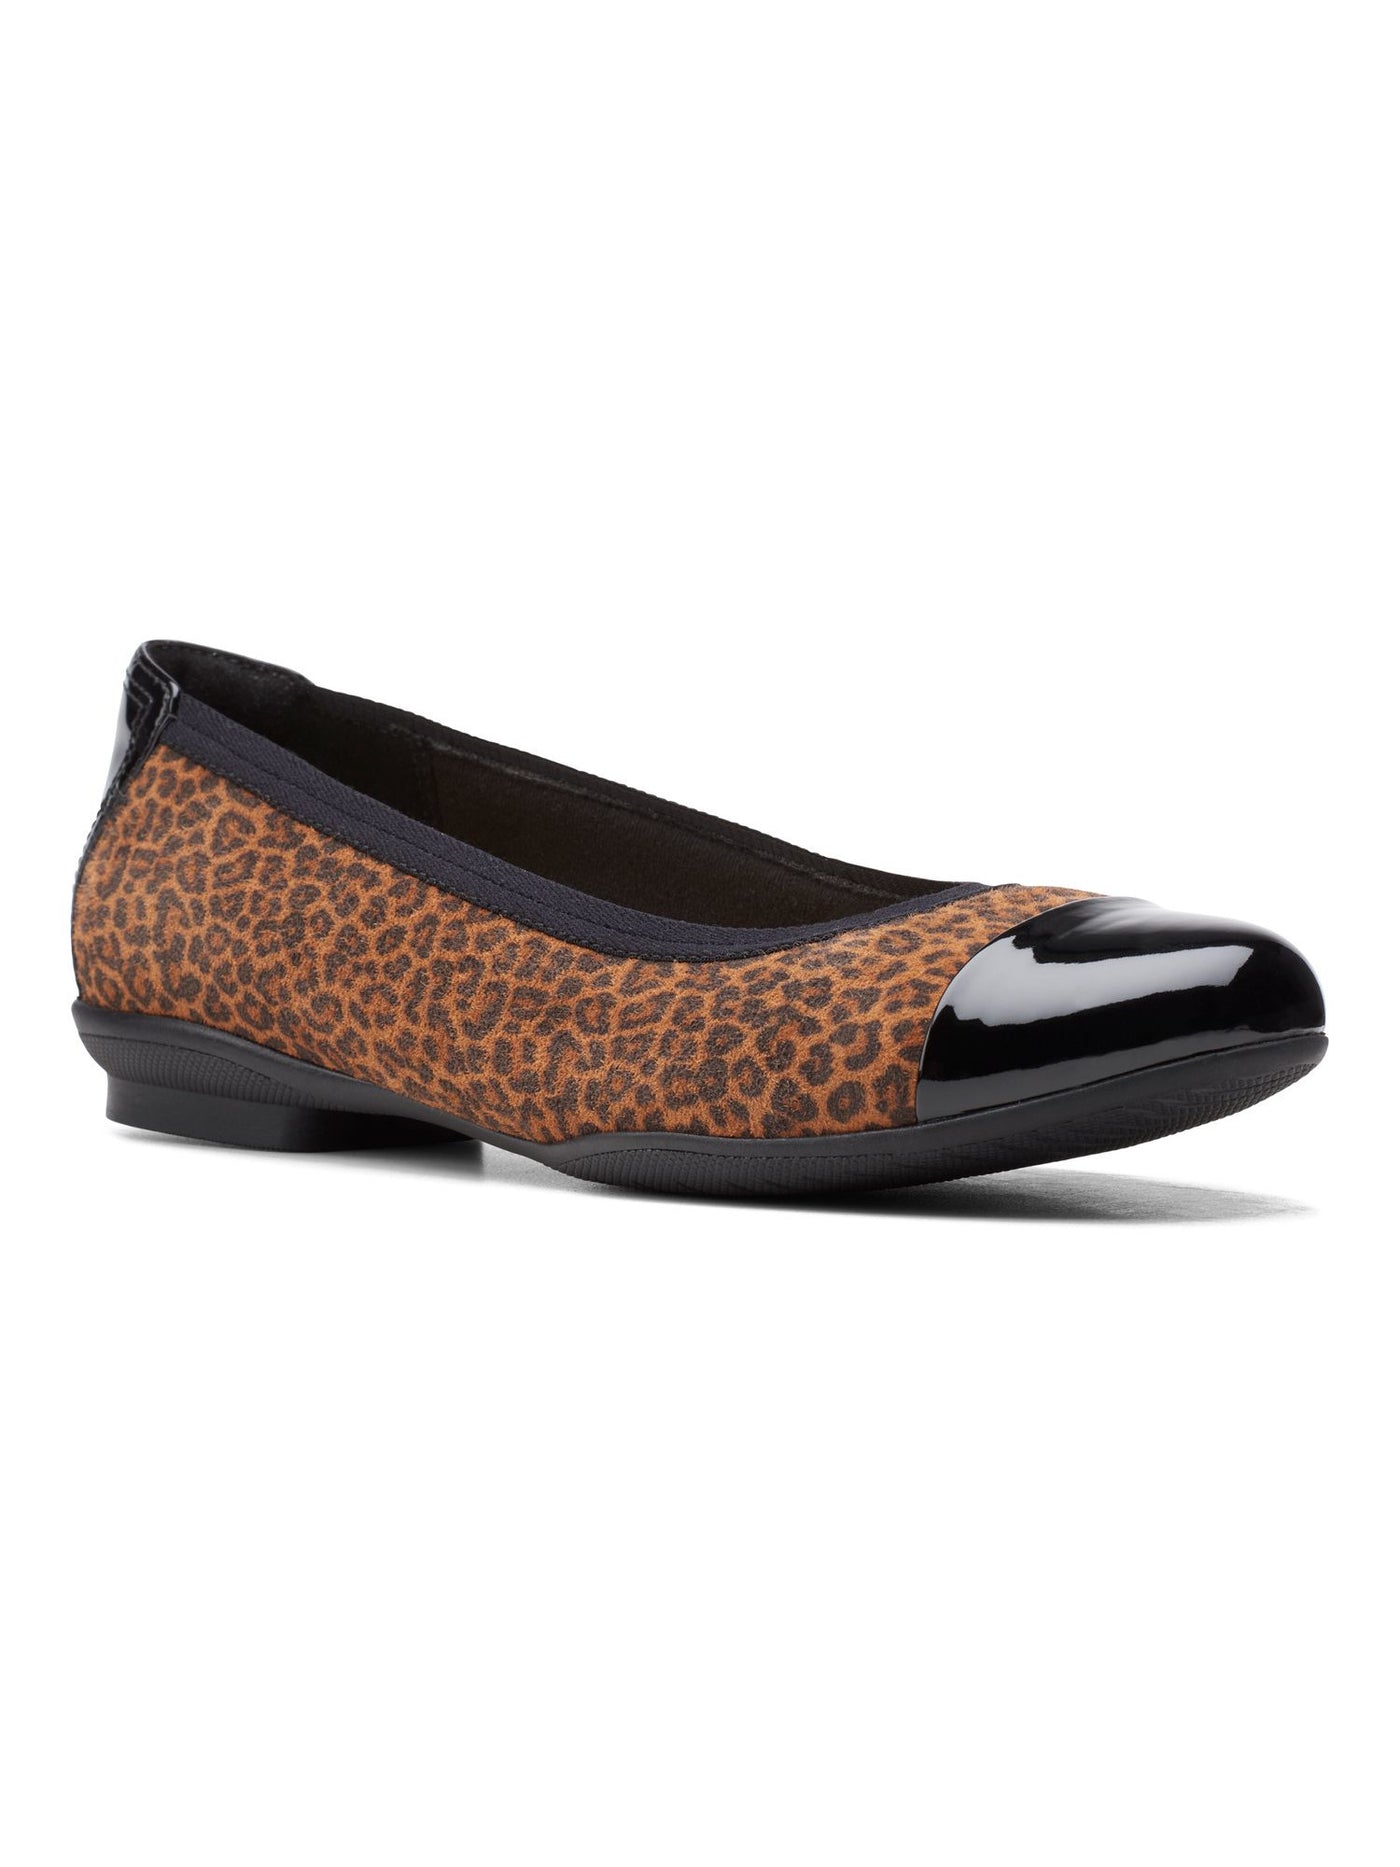 COLLECTION BY CLARKS Womens Orchid Brown Animal Print Cushioned Sara Cap Toe Slip On Leather Dress Flats 9 M